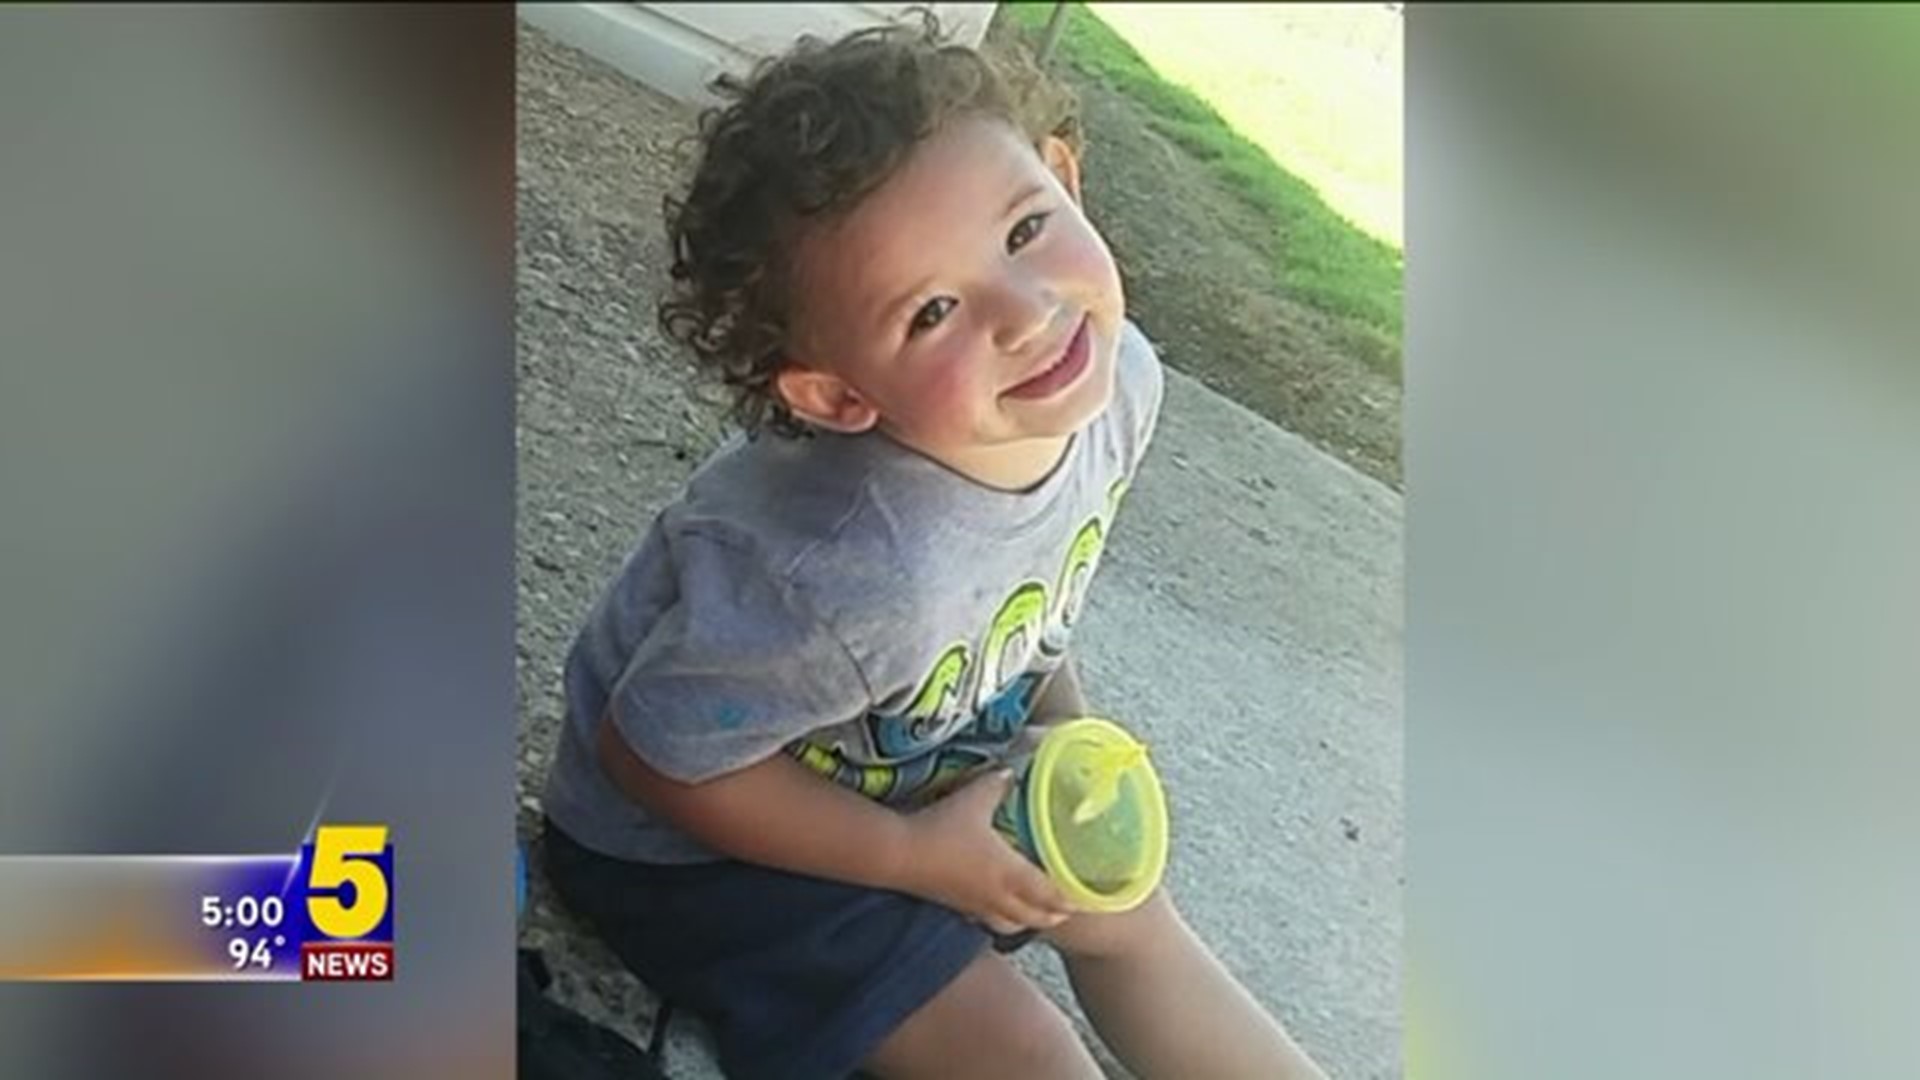 MADISON COUNTY TODDLER FOUND